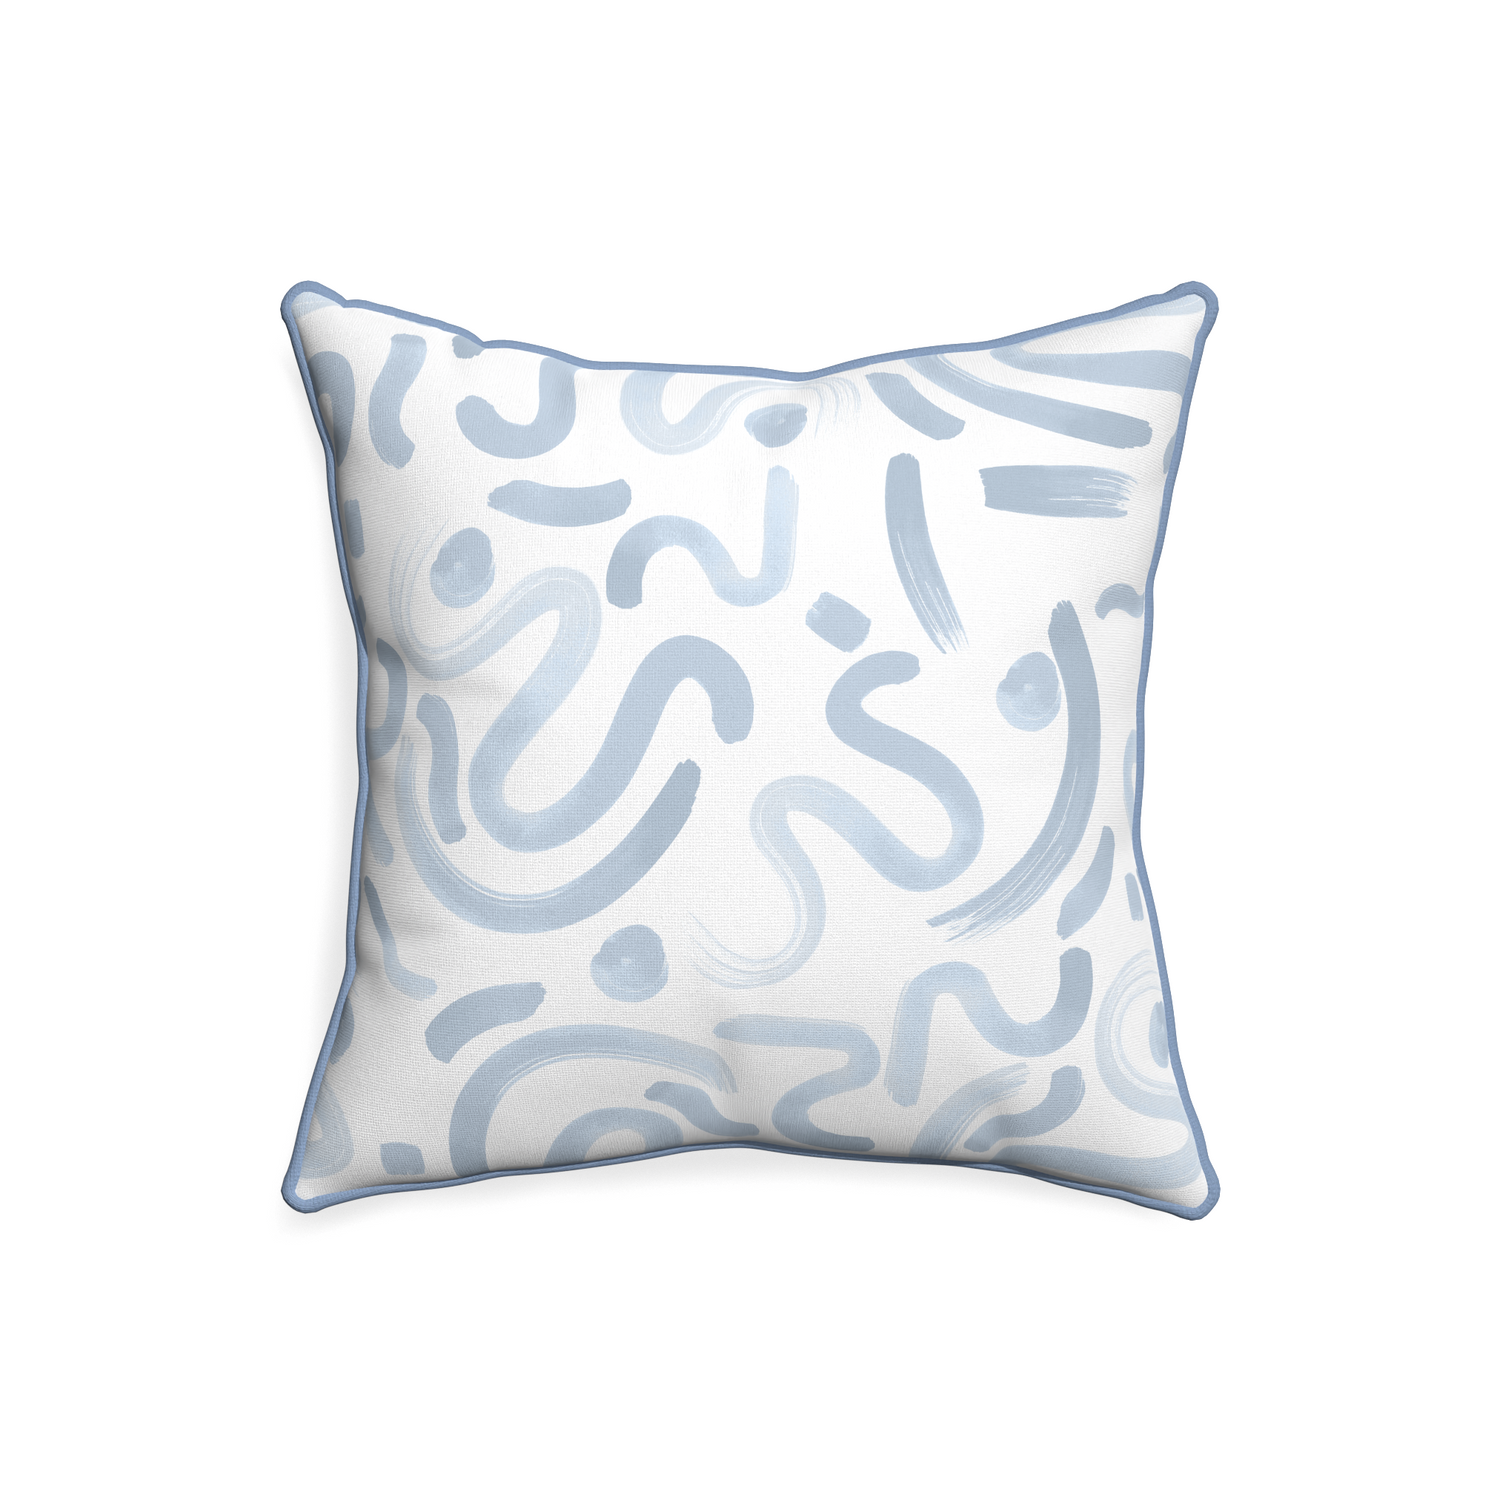 20-square hockney sky custom pillow with sky piping on white background